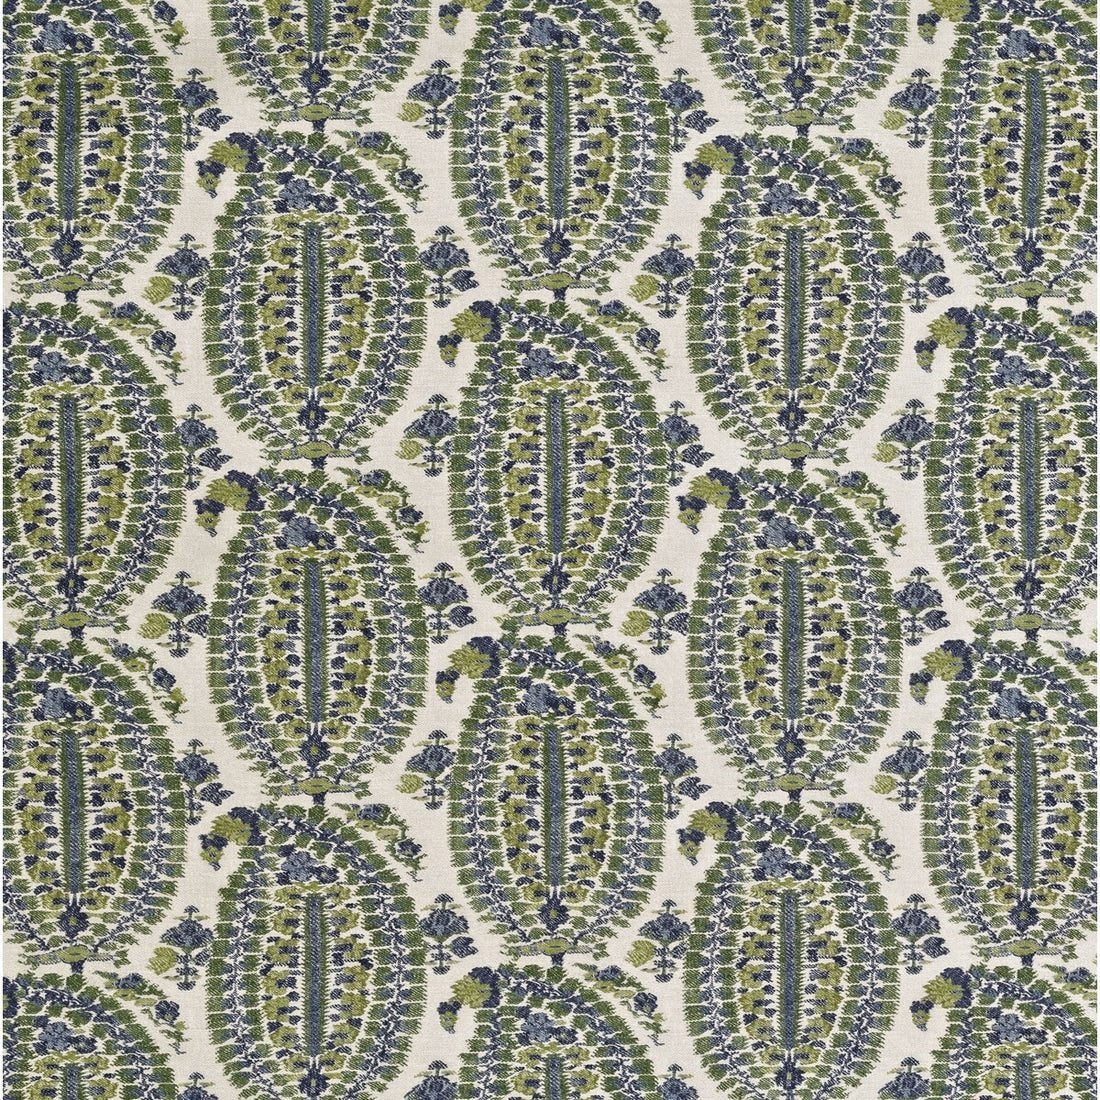 Anoushka fabric in blue/green color - pattern BFC-3660.523.0 - by Lee Jofa in the Blithfield collection